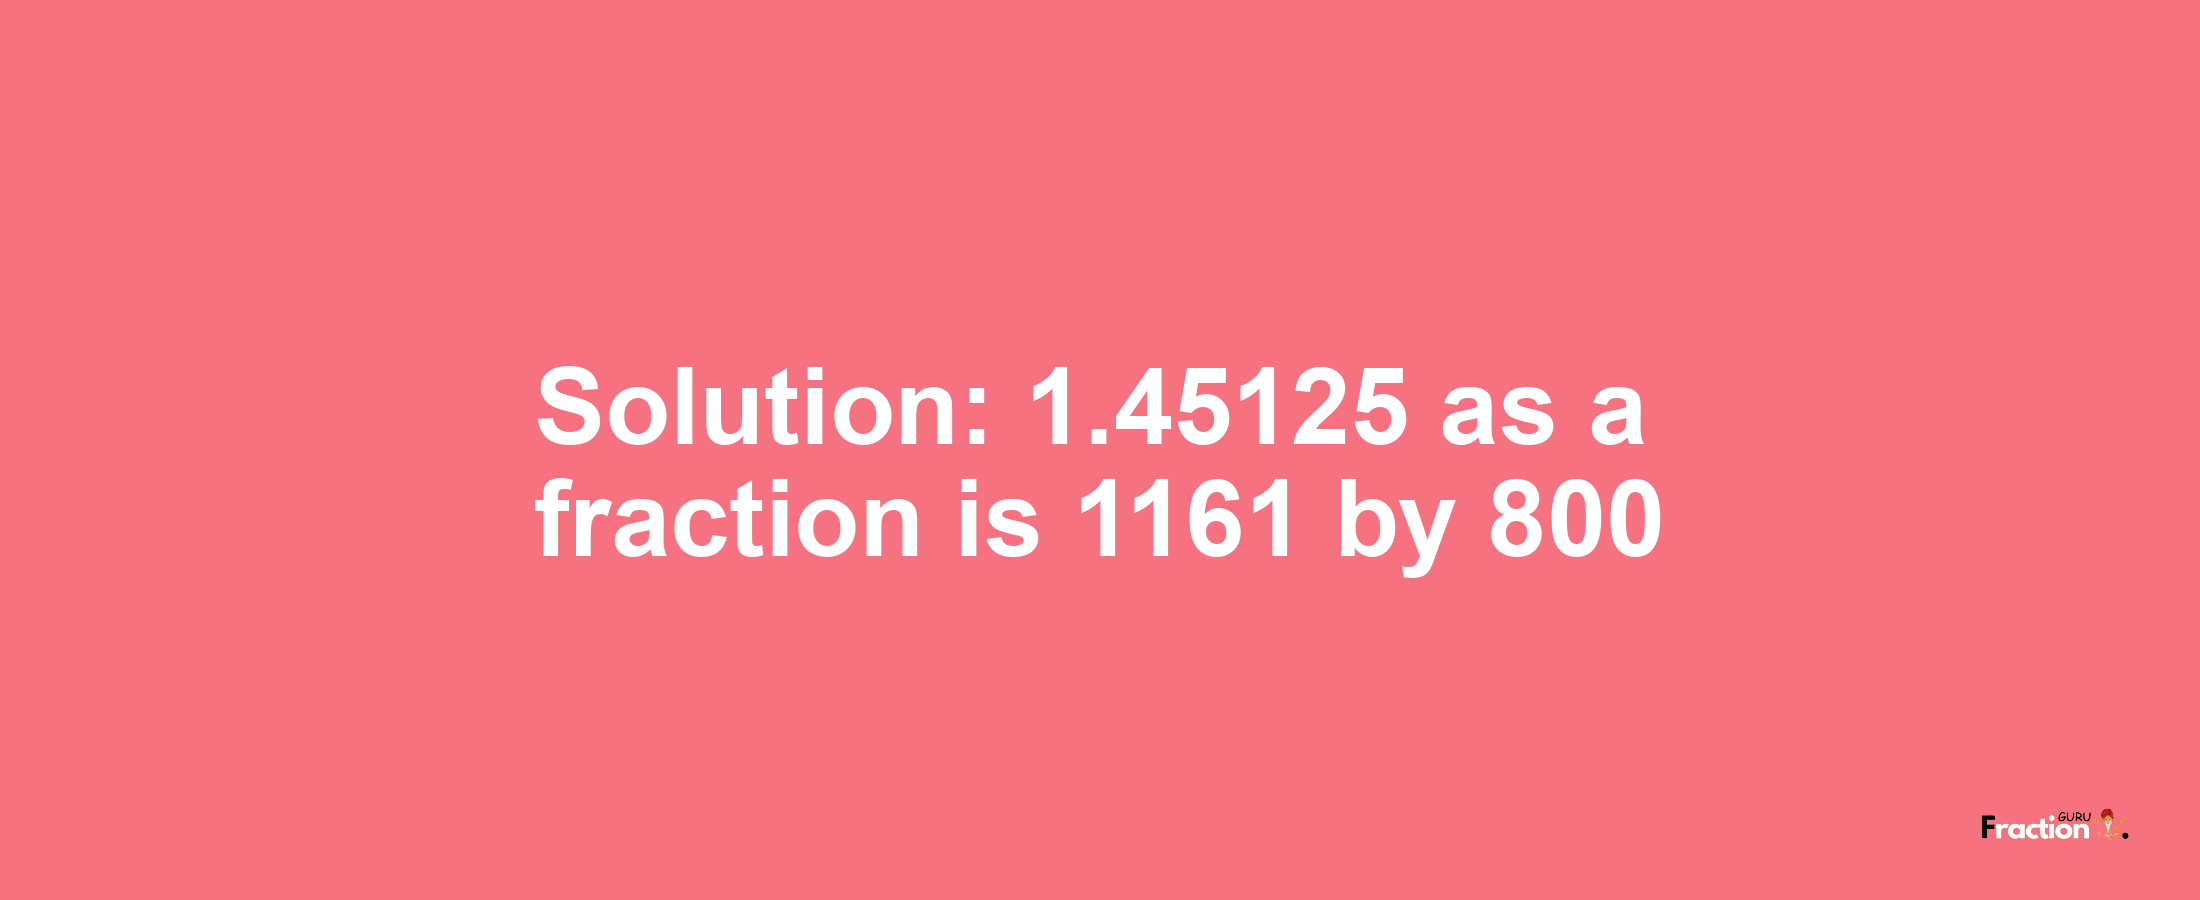 Solution:1.45125 as a fraction is 1161/800